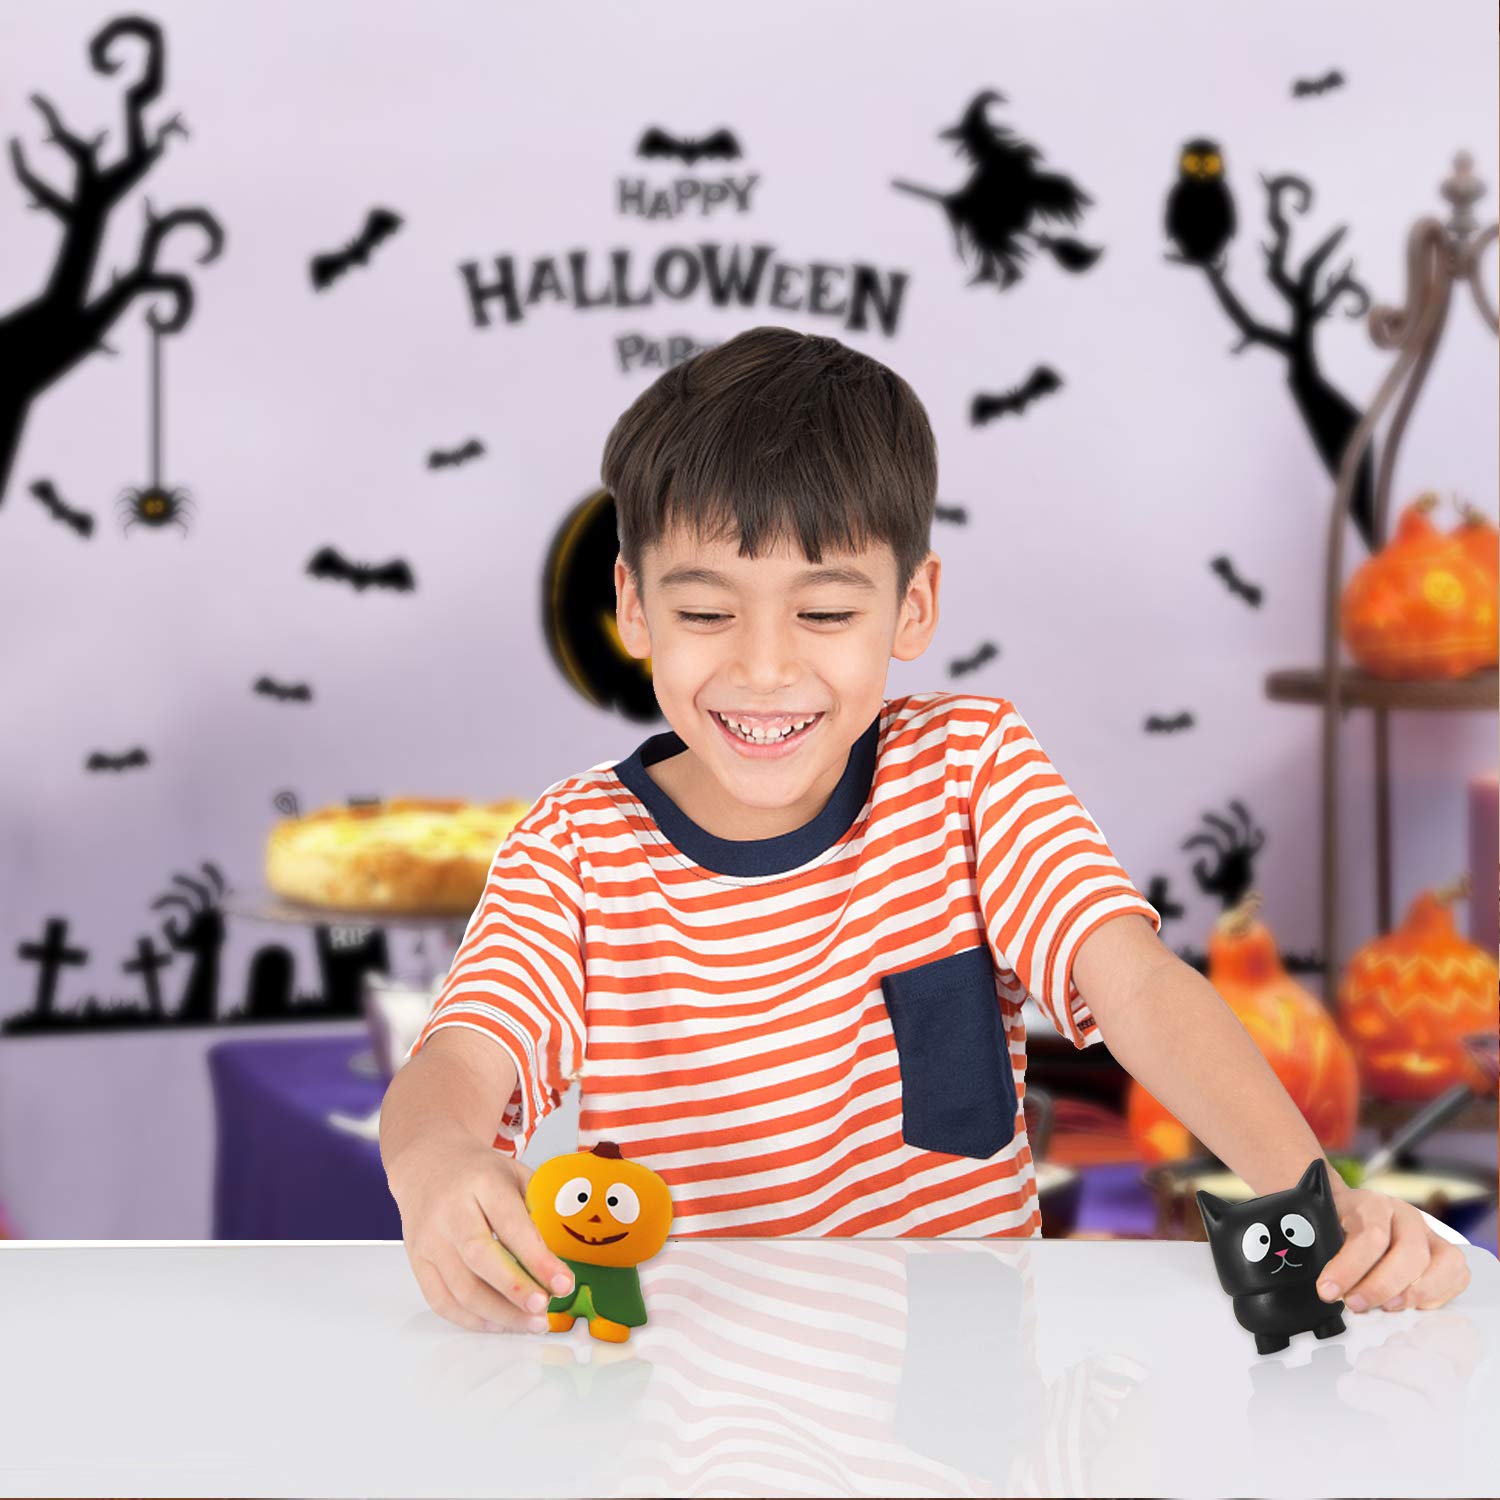 heytech 6 Packs Halloween Squishies Toys Slow Rising: Gift Box Includes Spooky, Pumpkin, Zombie,Black Cat,Mummy, Vampire Soft Squishy Toys Great Sensory Toys for Girls,Boys,Kids…